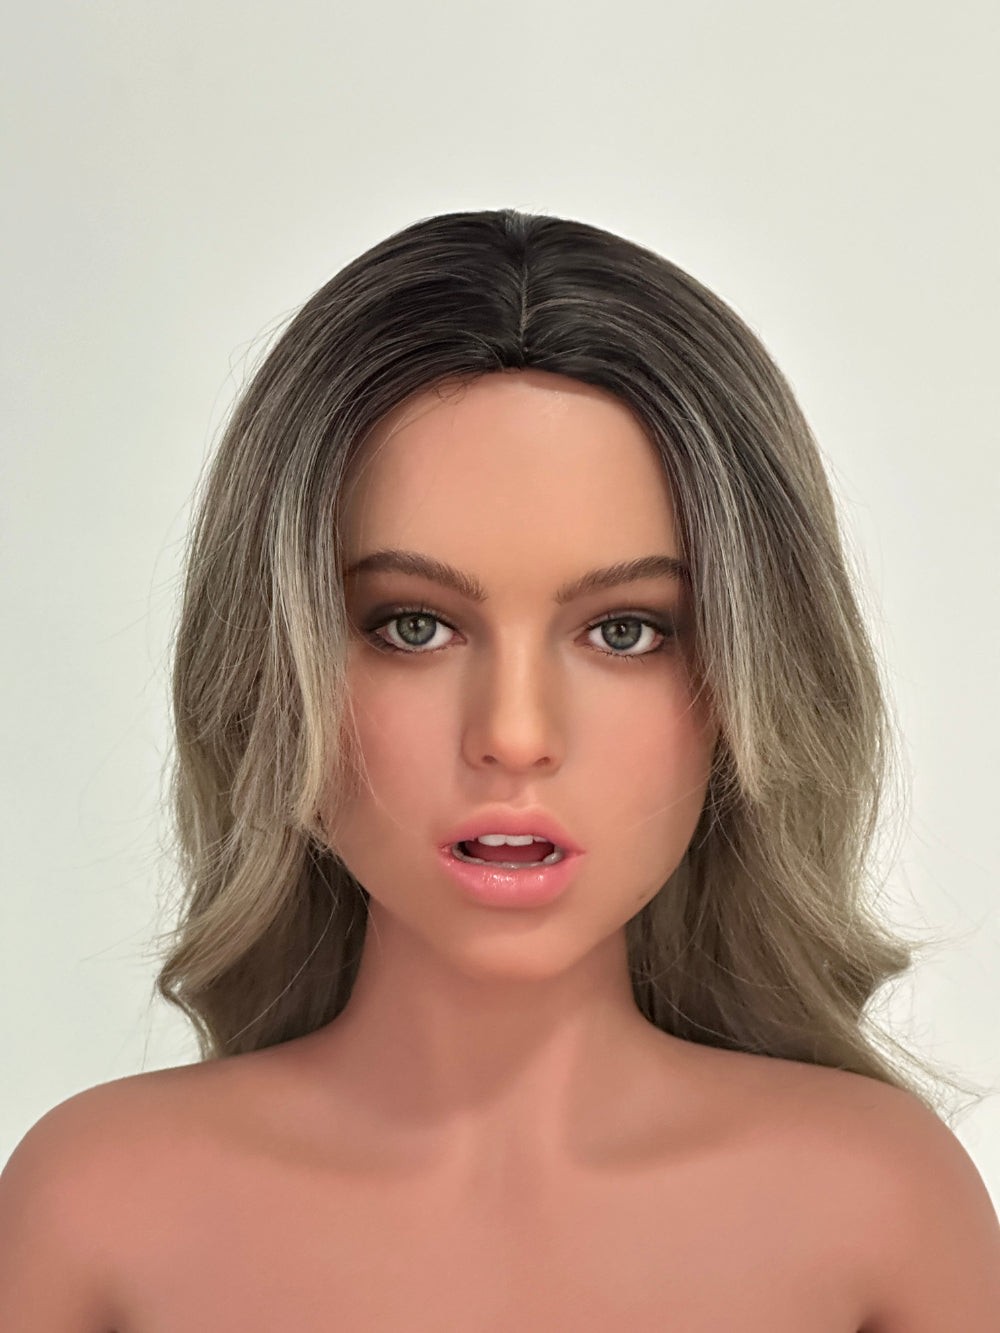 Zelex Doll SLE Series 163 cm E Silicone - ZXE201-2 Movable Jaw